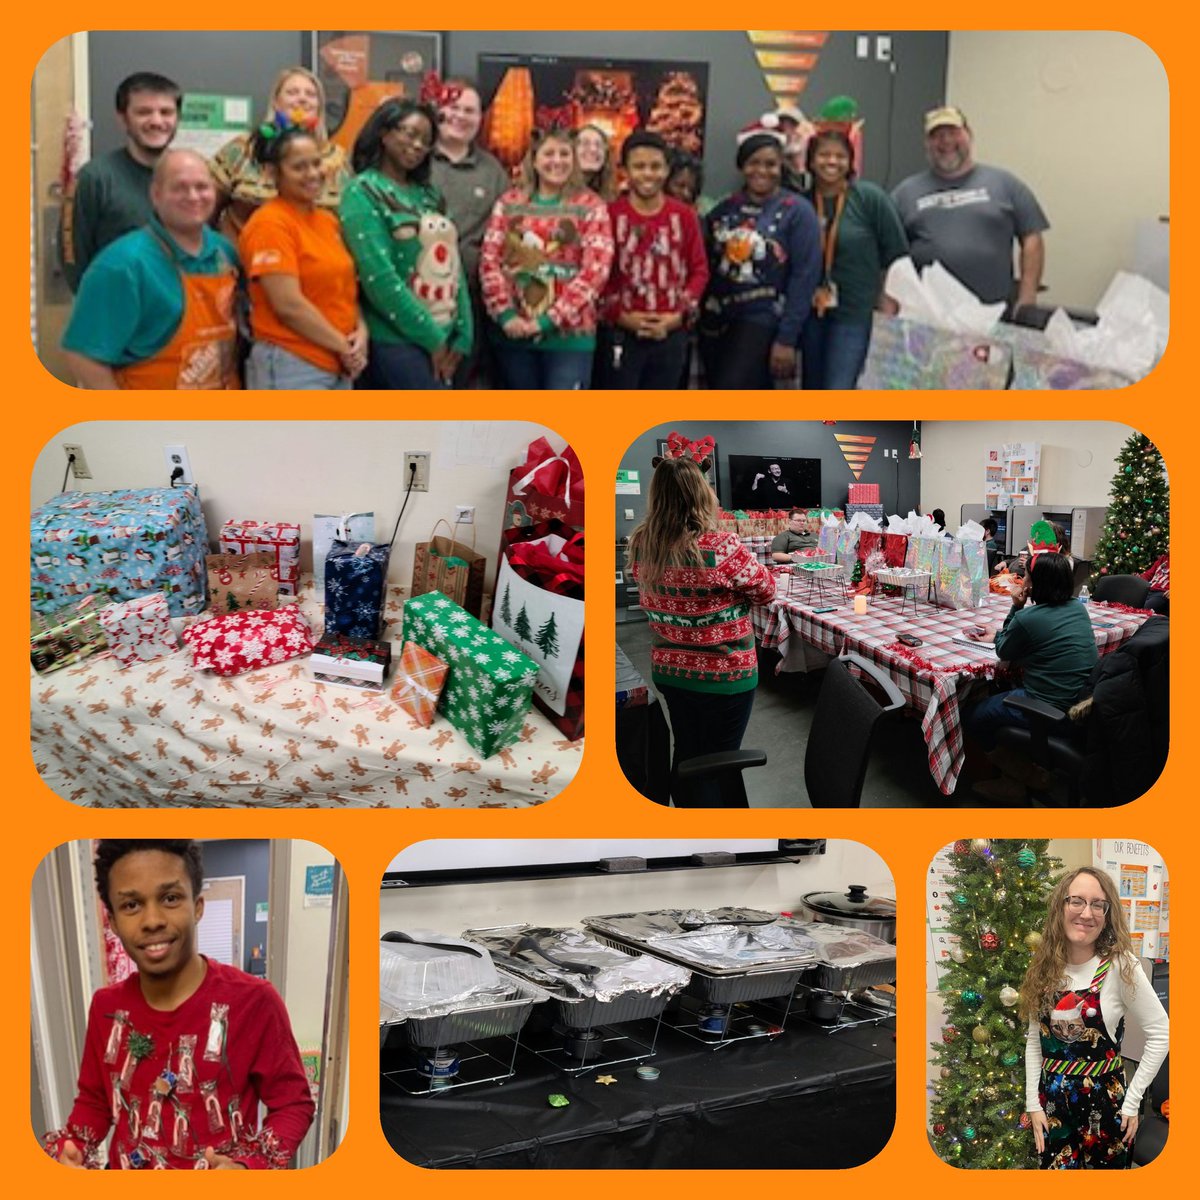 Tis the Season 🌲to be Jolly. 4624 Management Holiday🫕Pot Luck. Great Food 🍛, Fun 😀 & Friendship, we are so Greatful ❤️ for our Team! @HillaryHyatt @kmn293 @Jme_Dvs